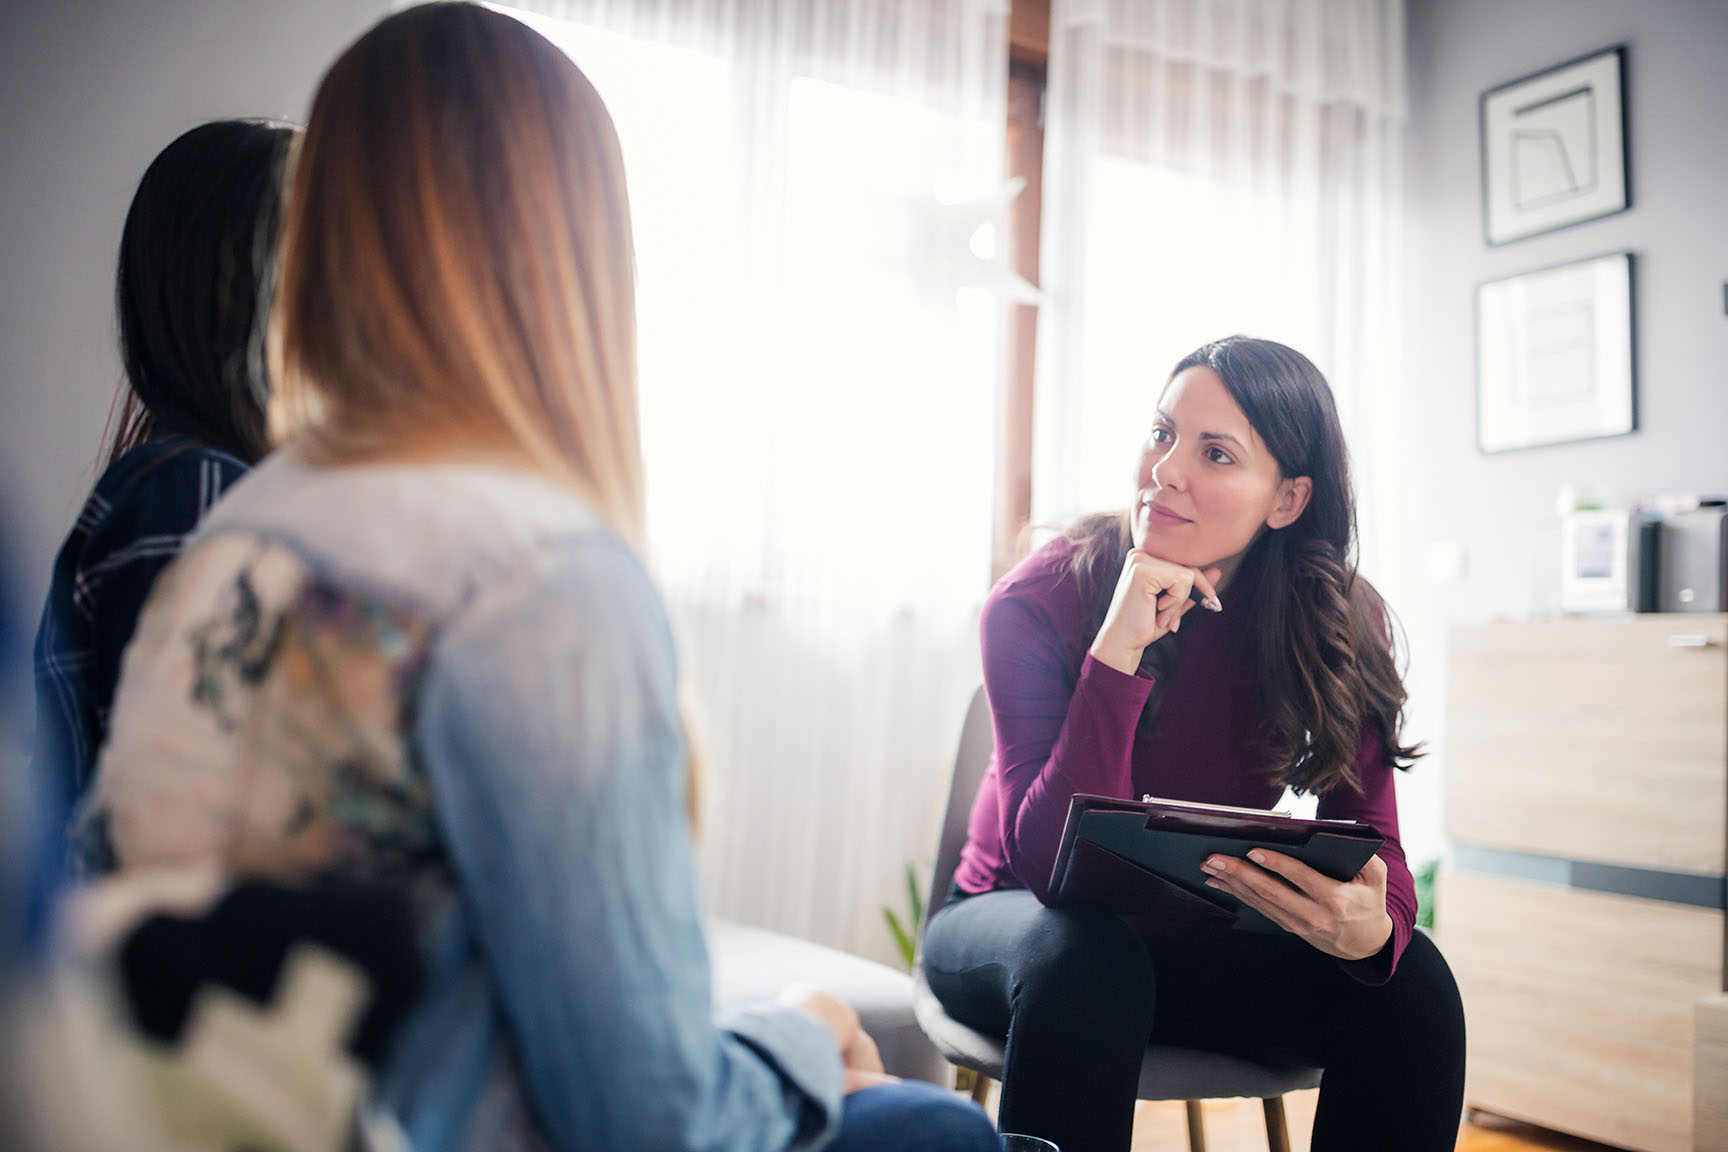 Home counselling - stock photo Girlfriends on home counseling sessions.